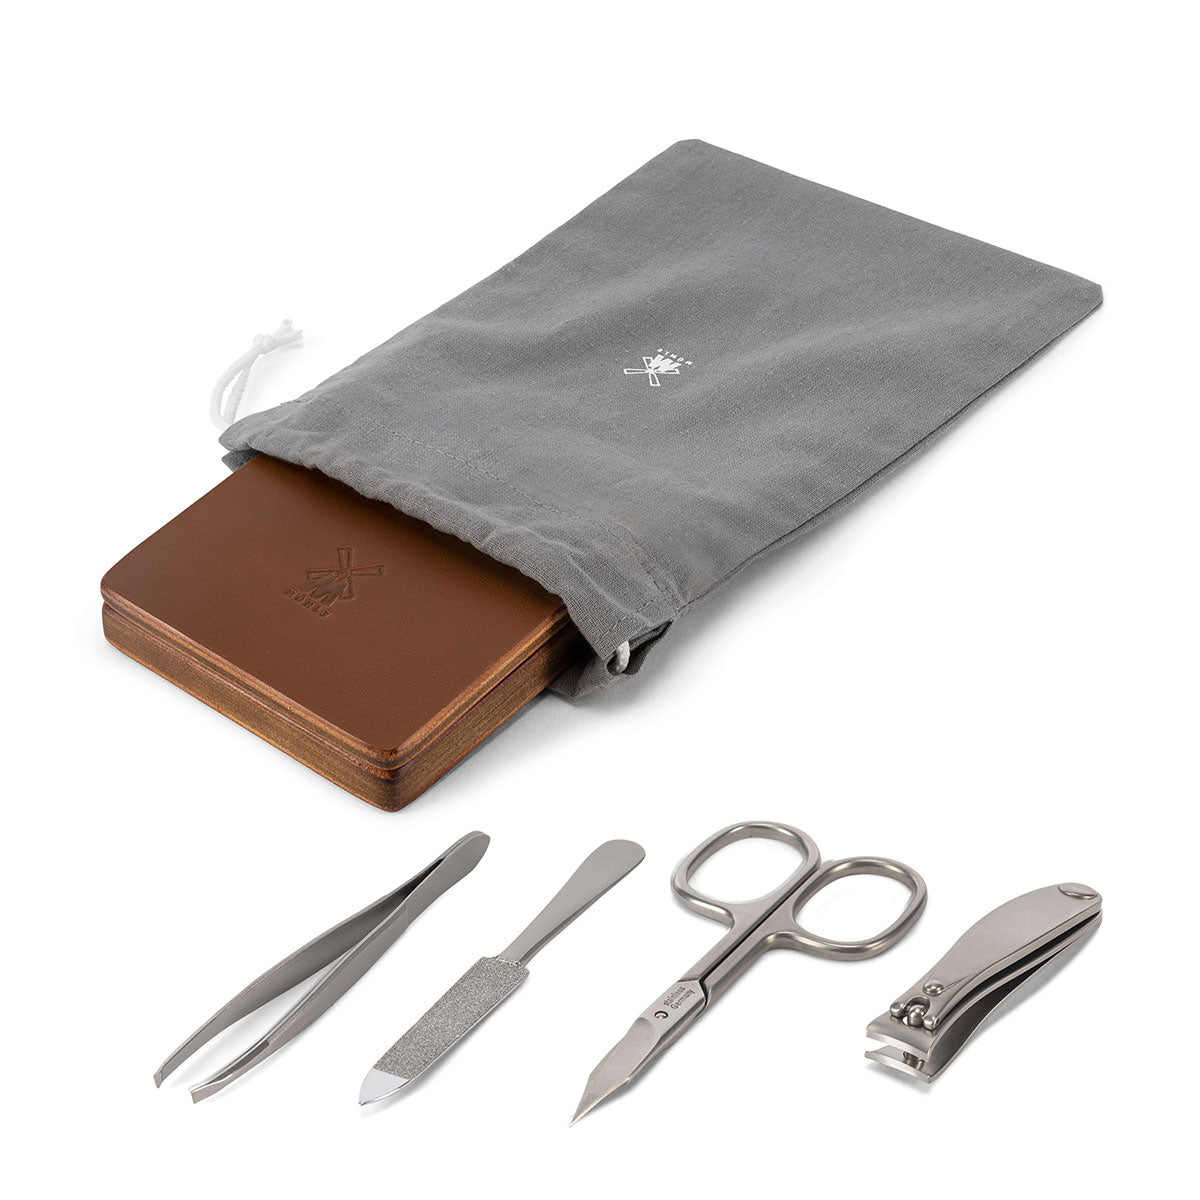 MÜHLE TRAVEL Manicure Set in Cowhide Case